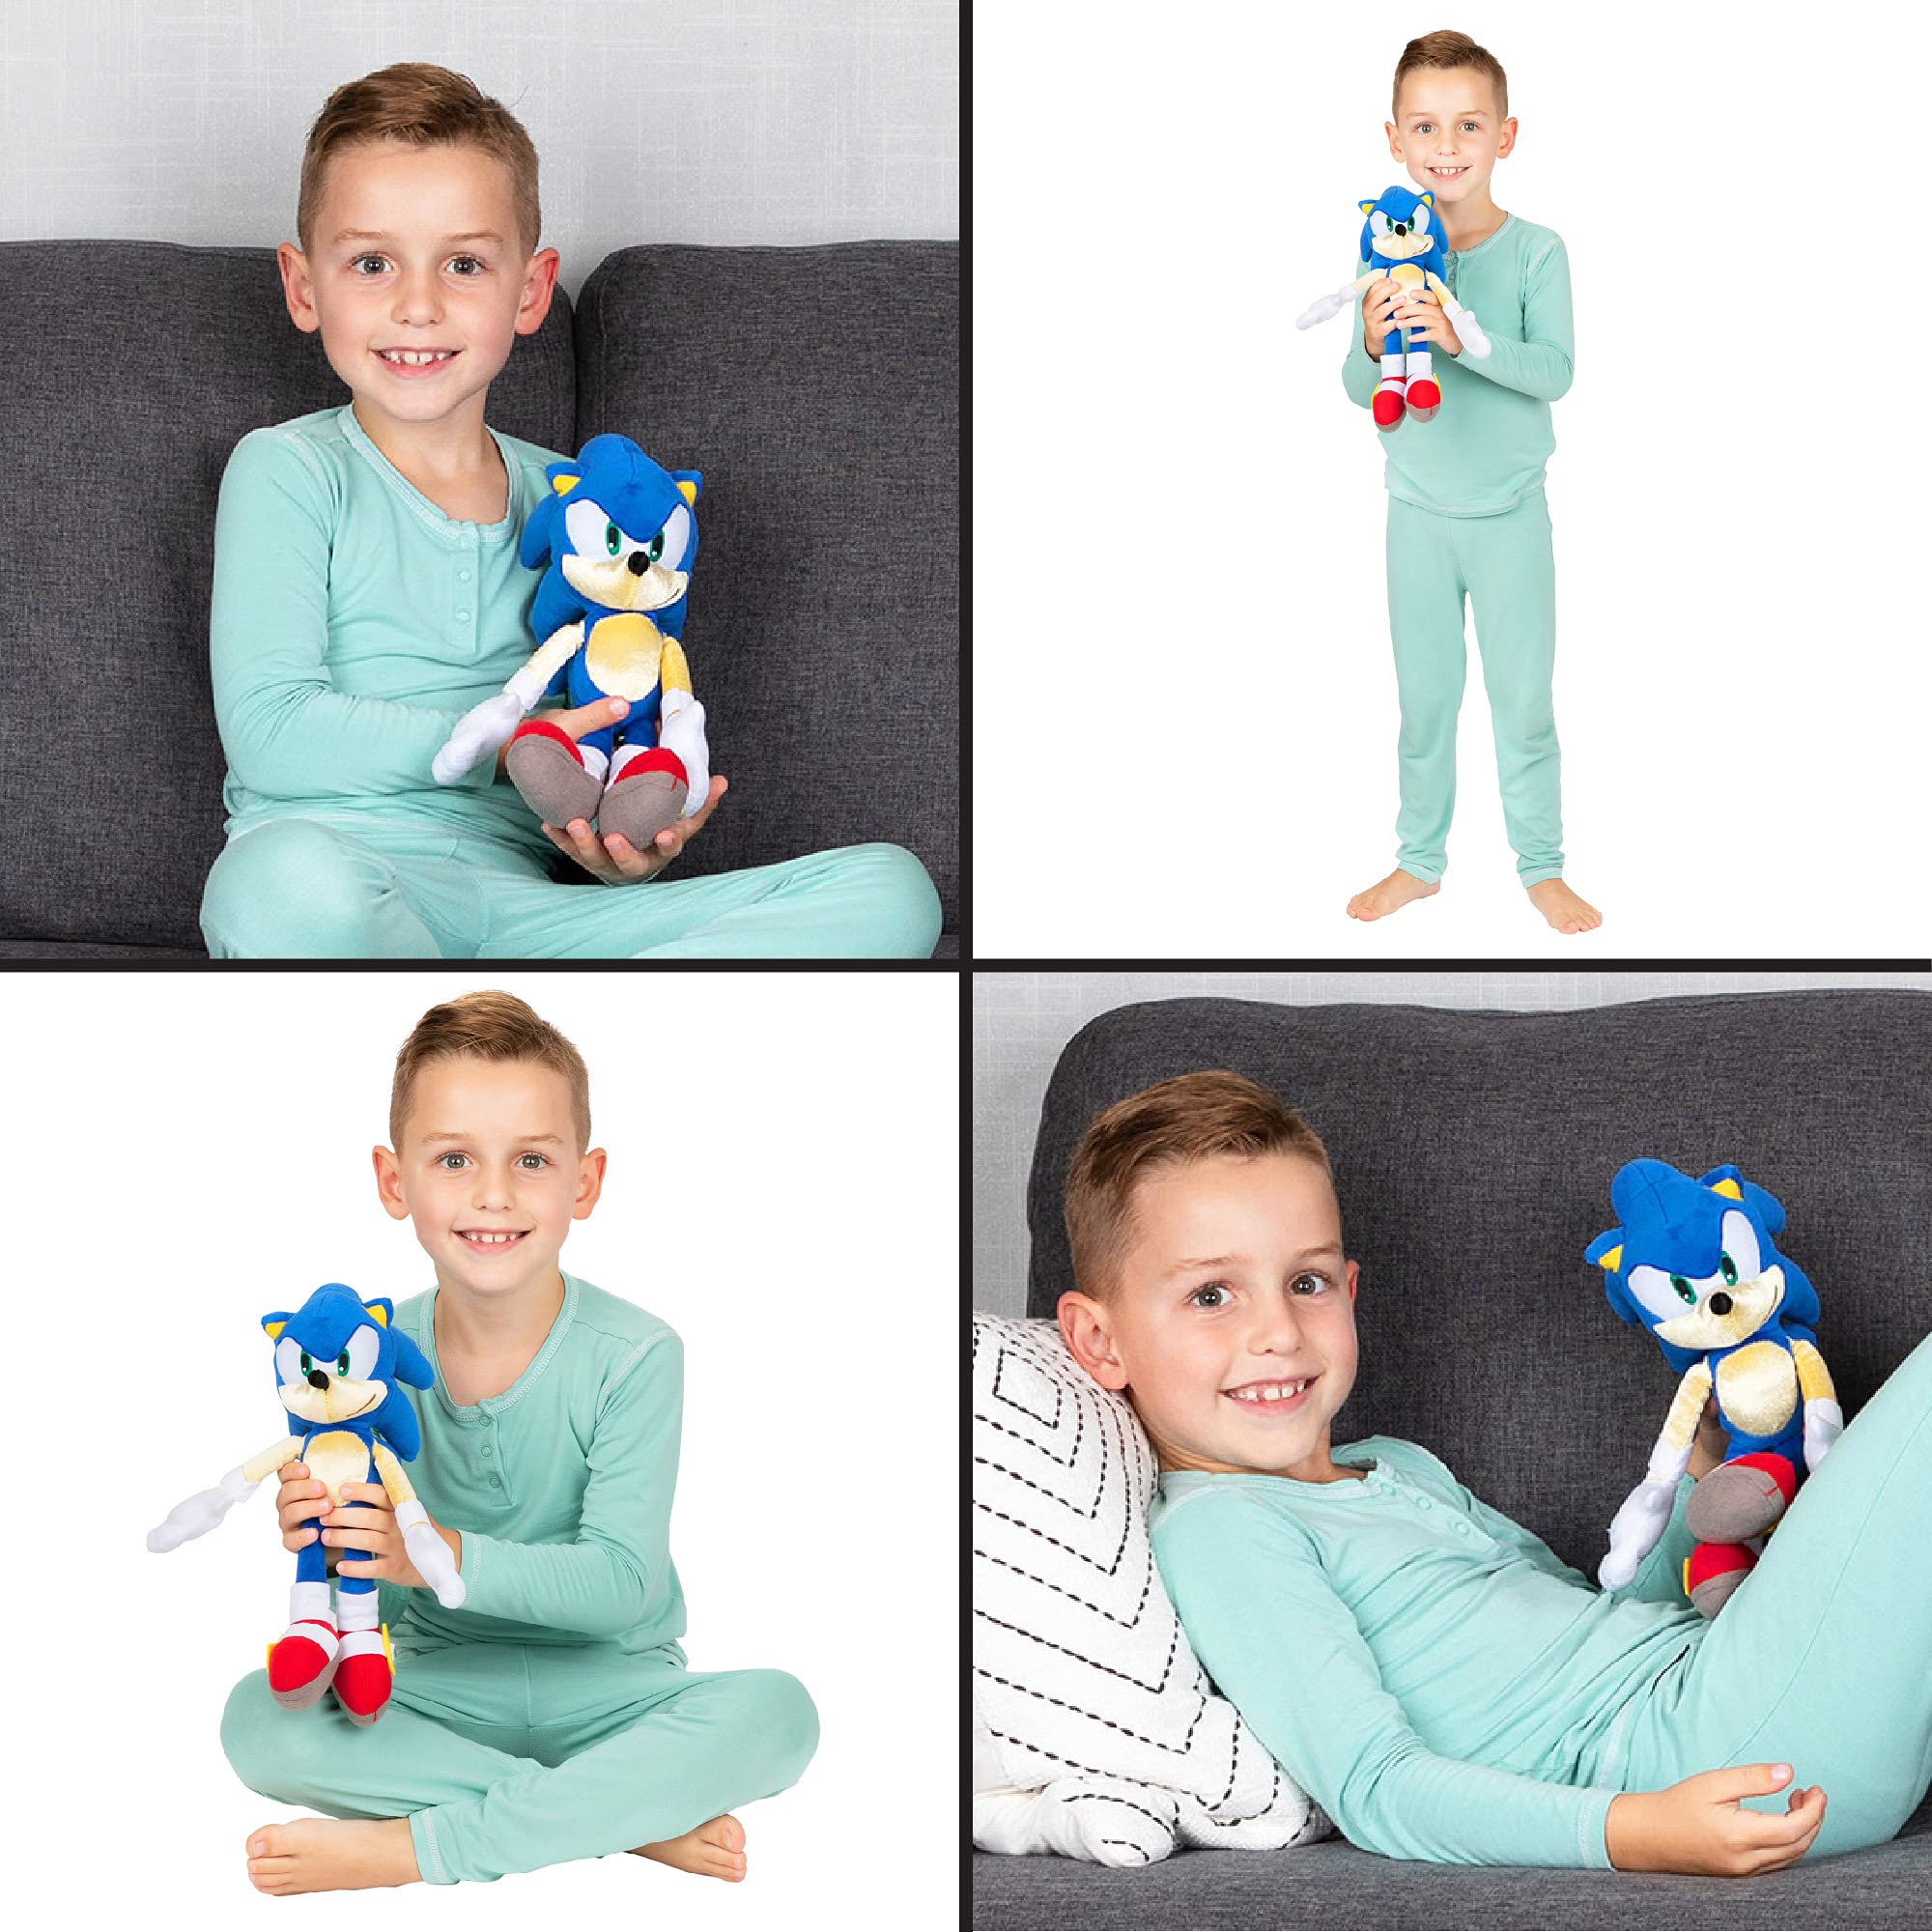 Franco Sonic The Hedgehog Anime Kids Bedding Twin/Full Comforter with Twin Sheet Set and Cuddle Pillow, 5 Piece Bedroom Set (Official Sega Licensed Product)